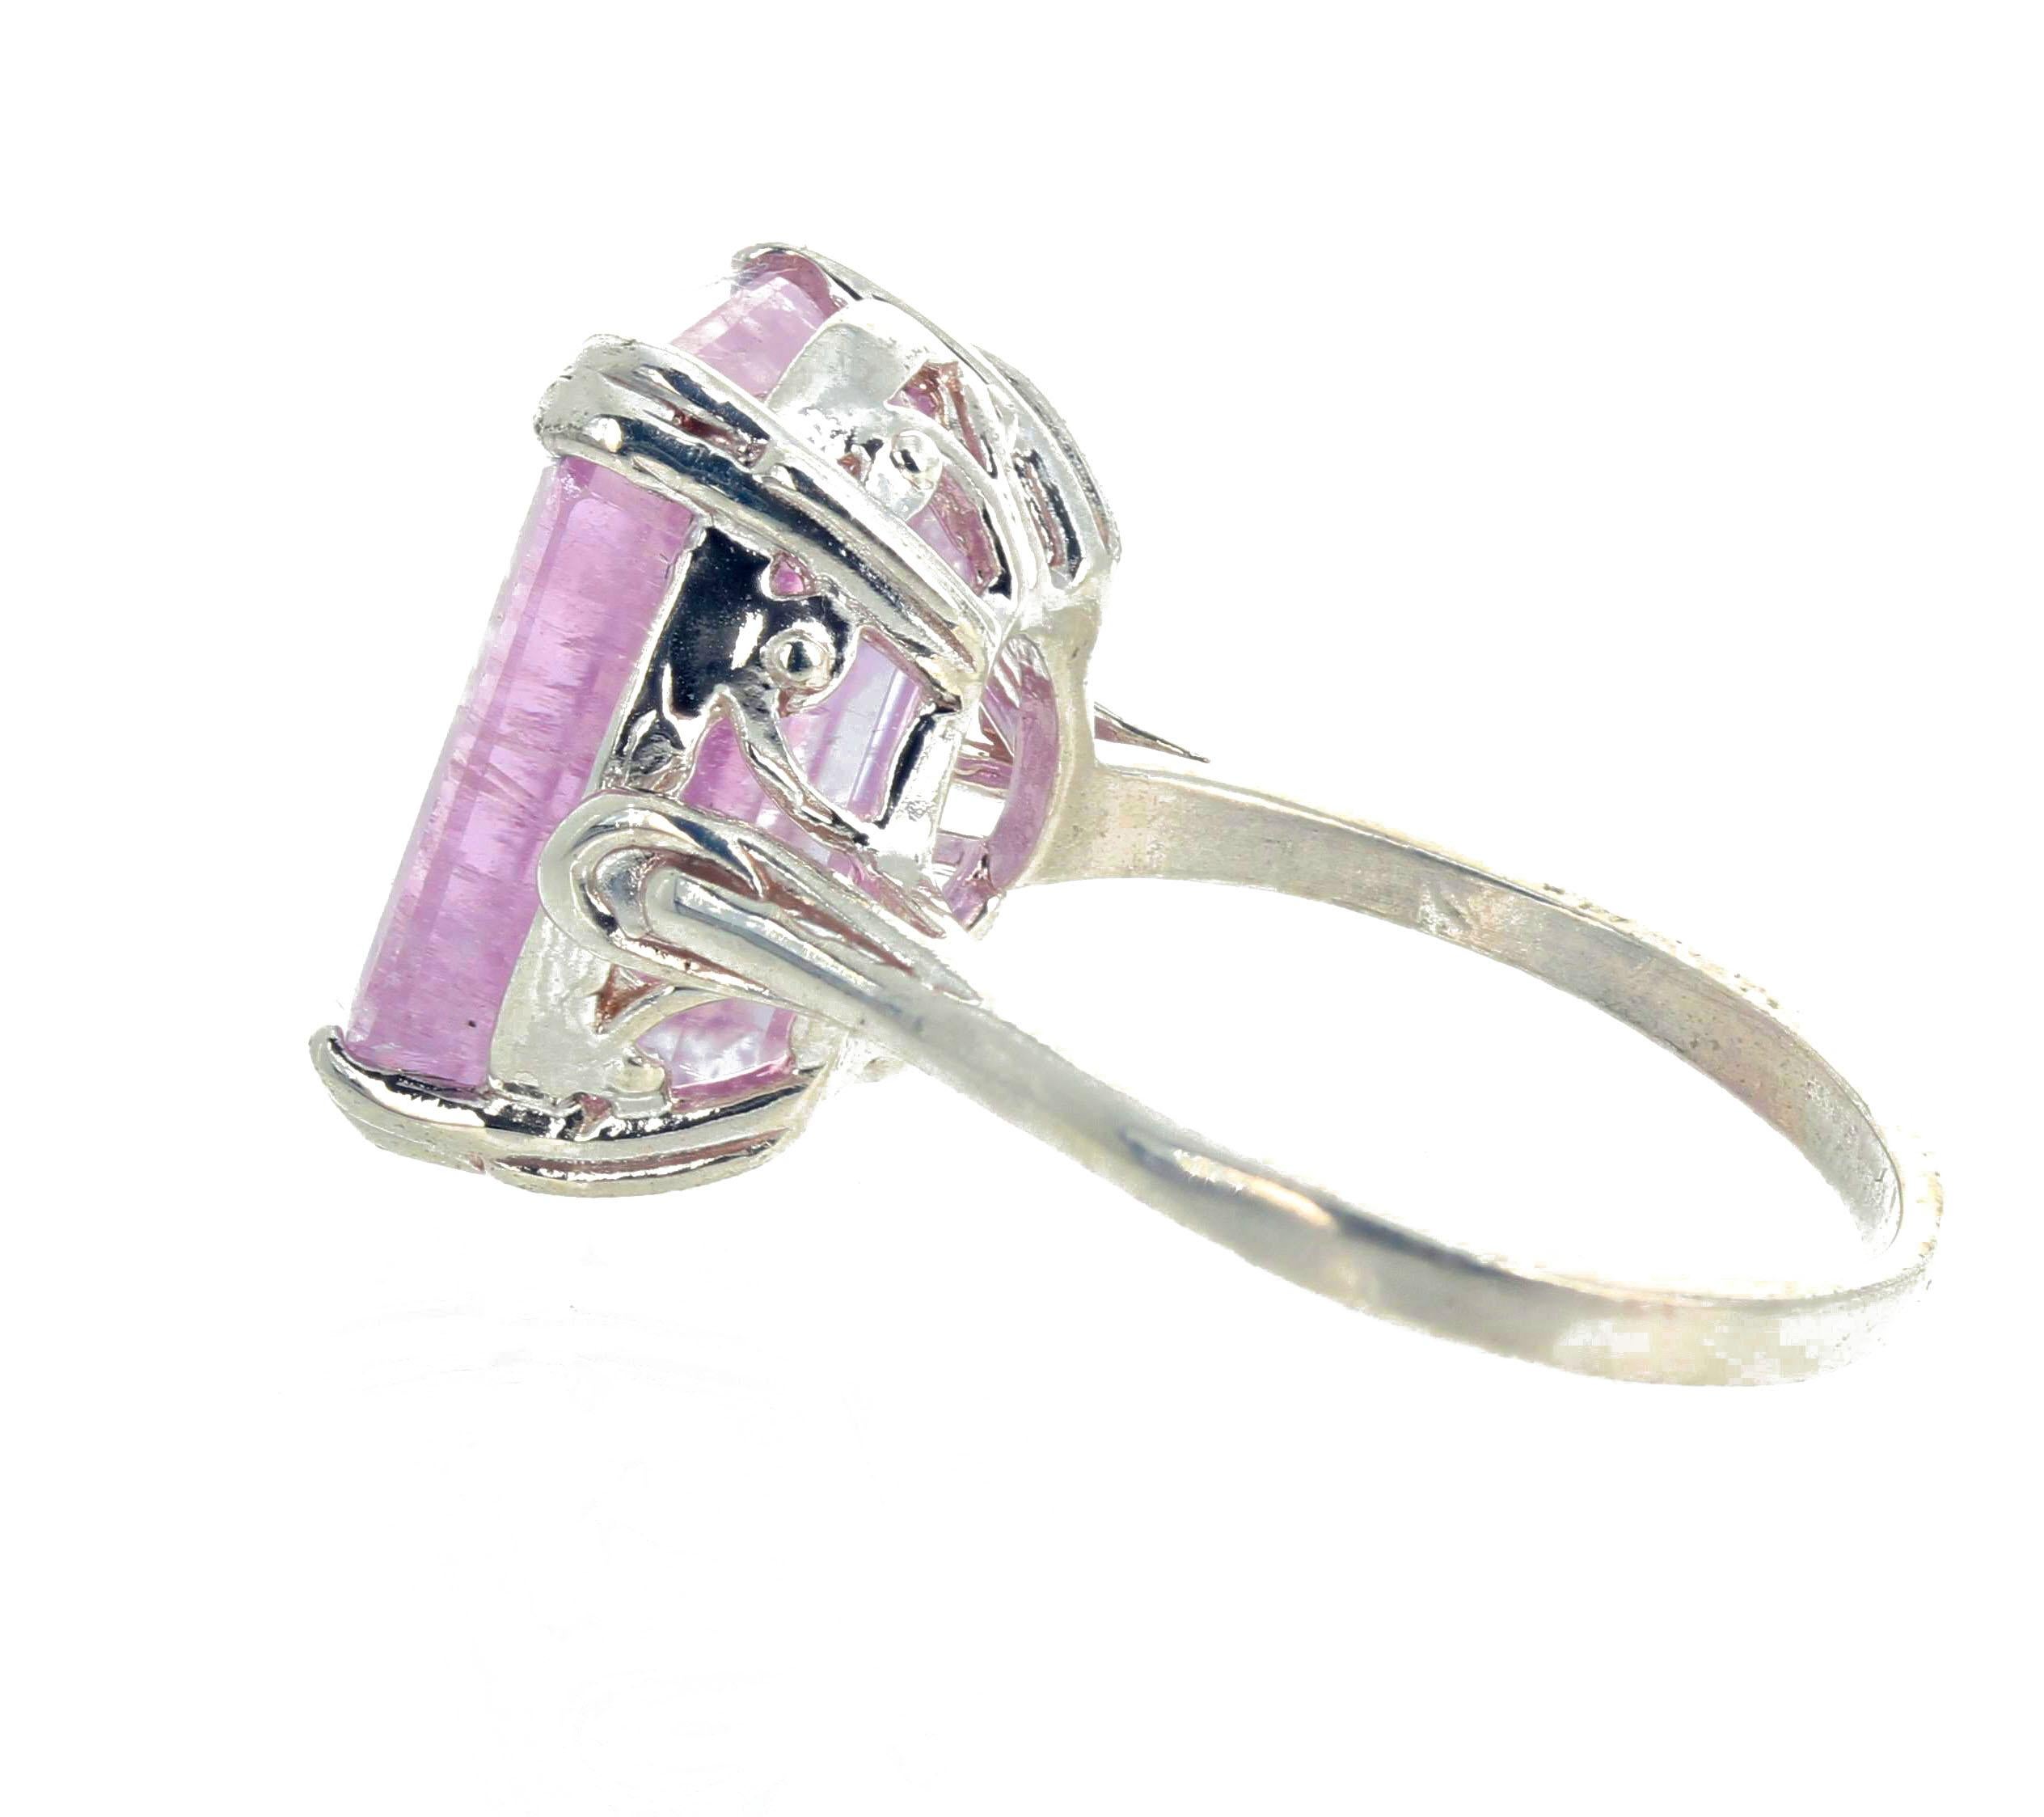 Gemjunky Extraordinary Brillant 12.6 Ct. Pink Kunzite Solitaire Silver Ring 1